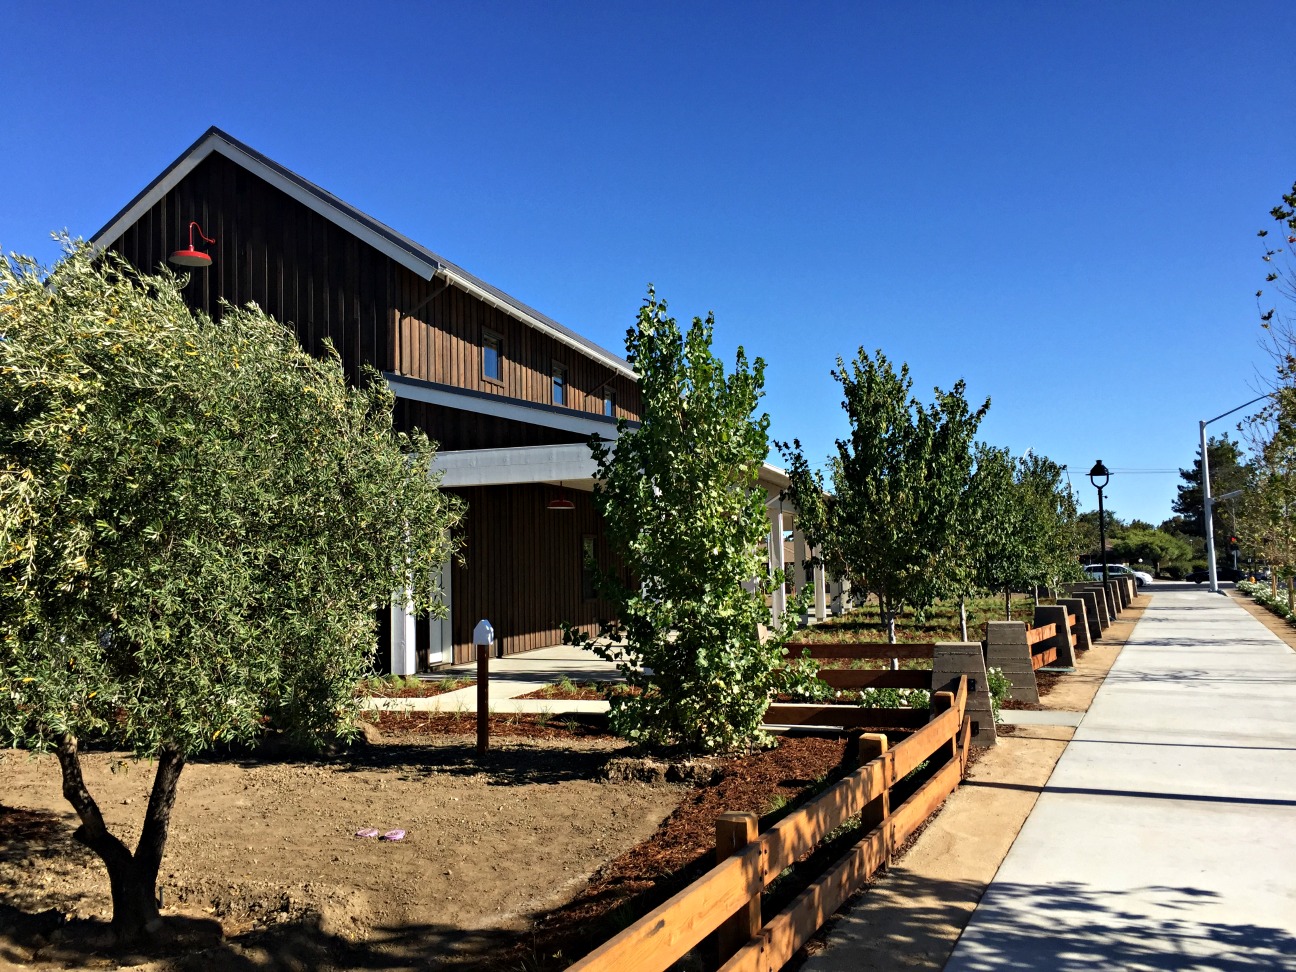 BrightView Develops and Maintains farm-to-table community.